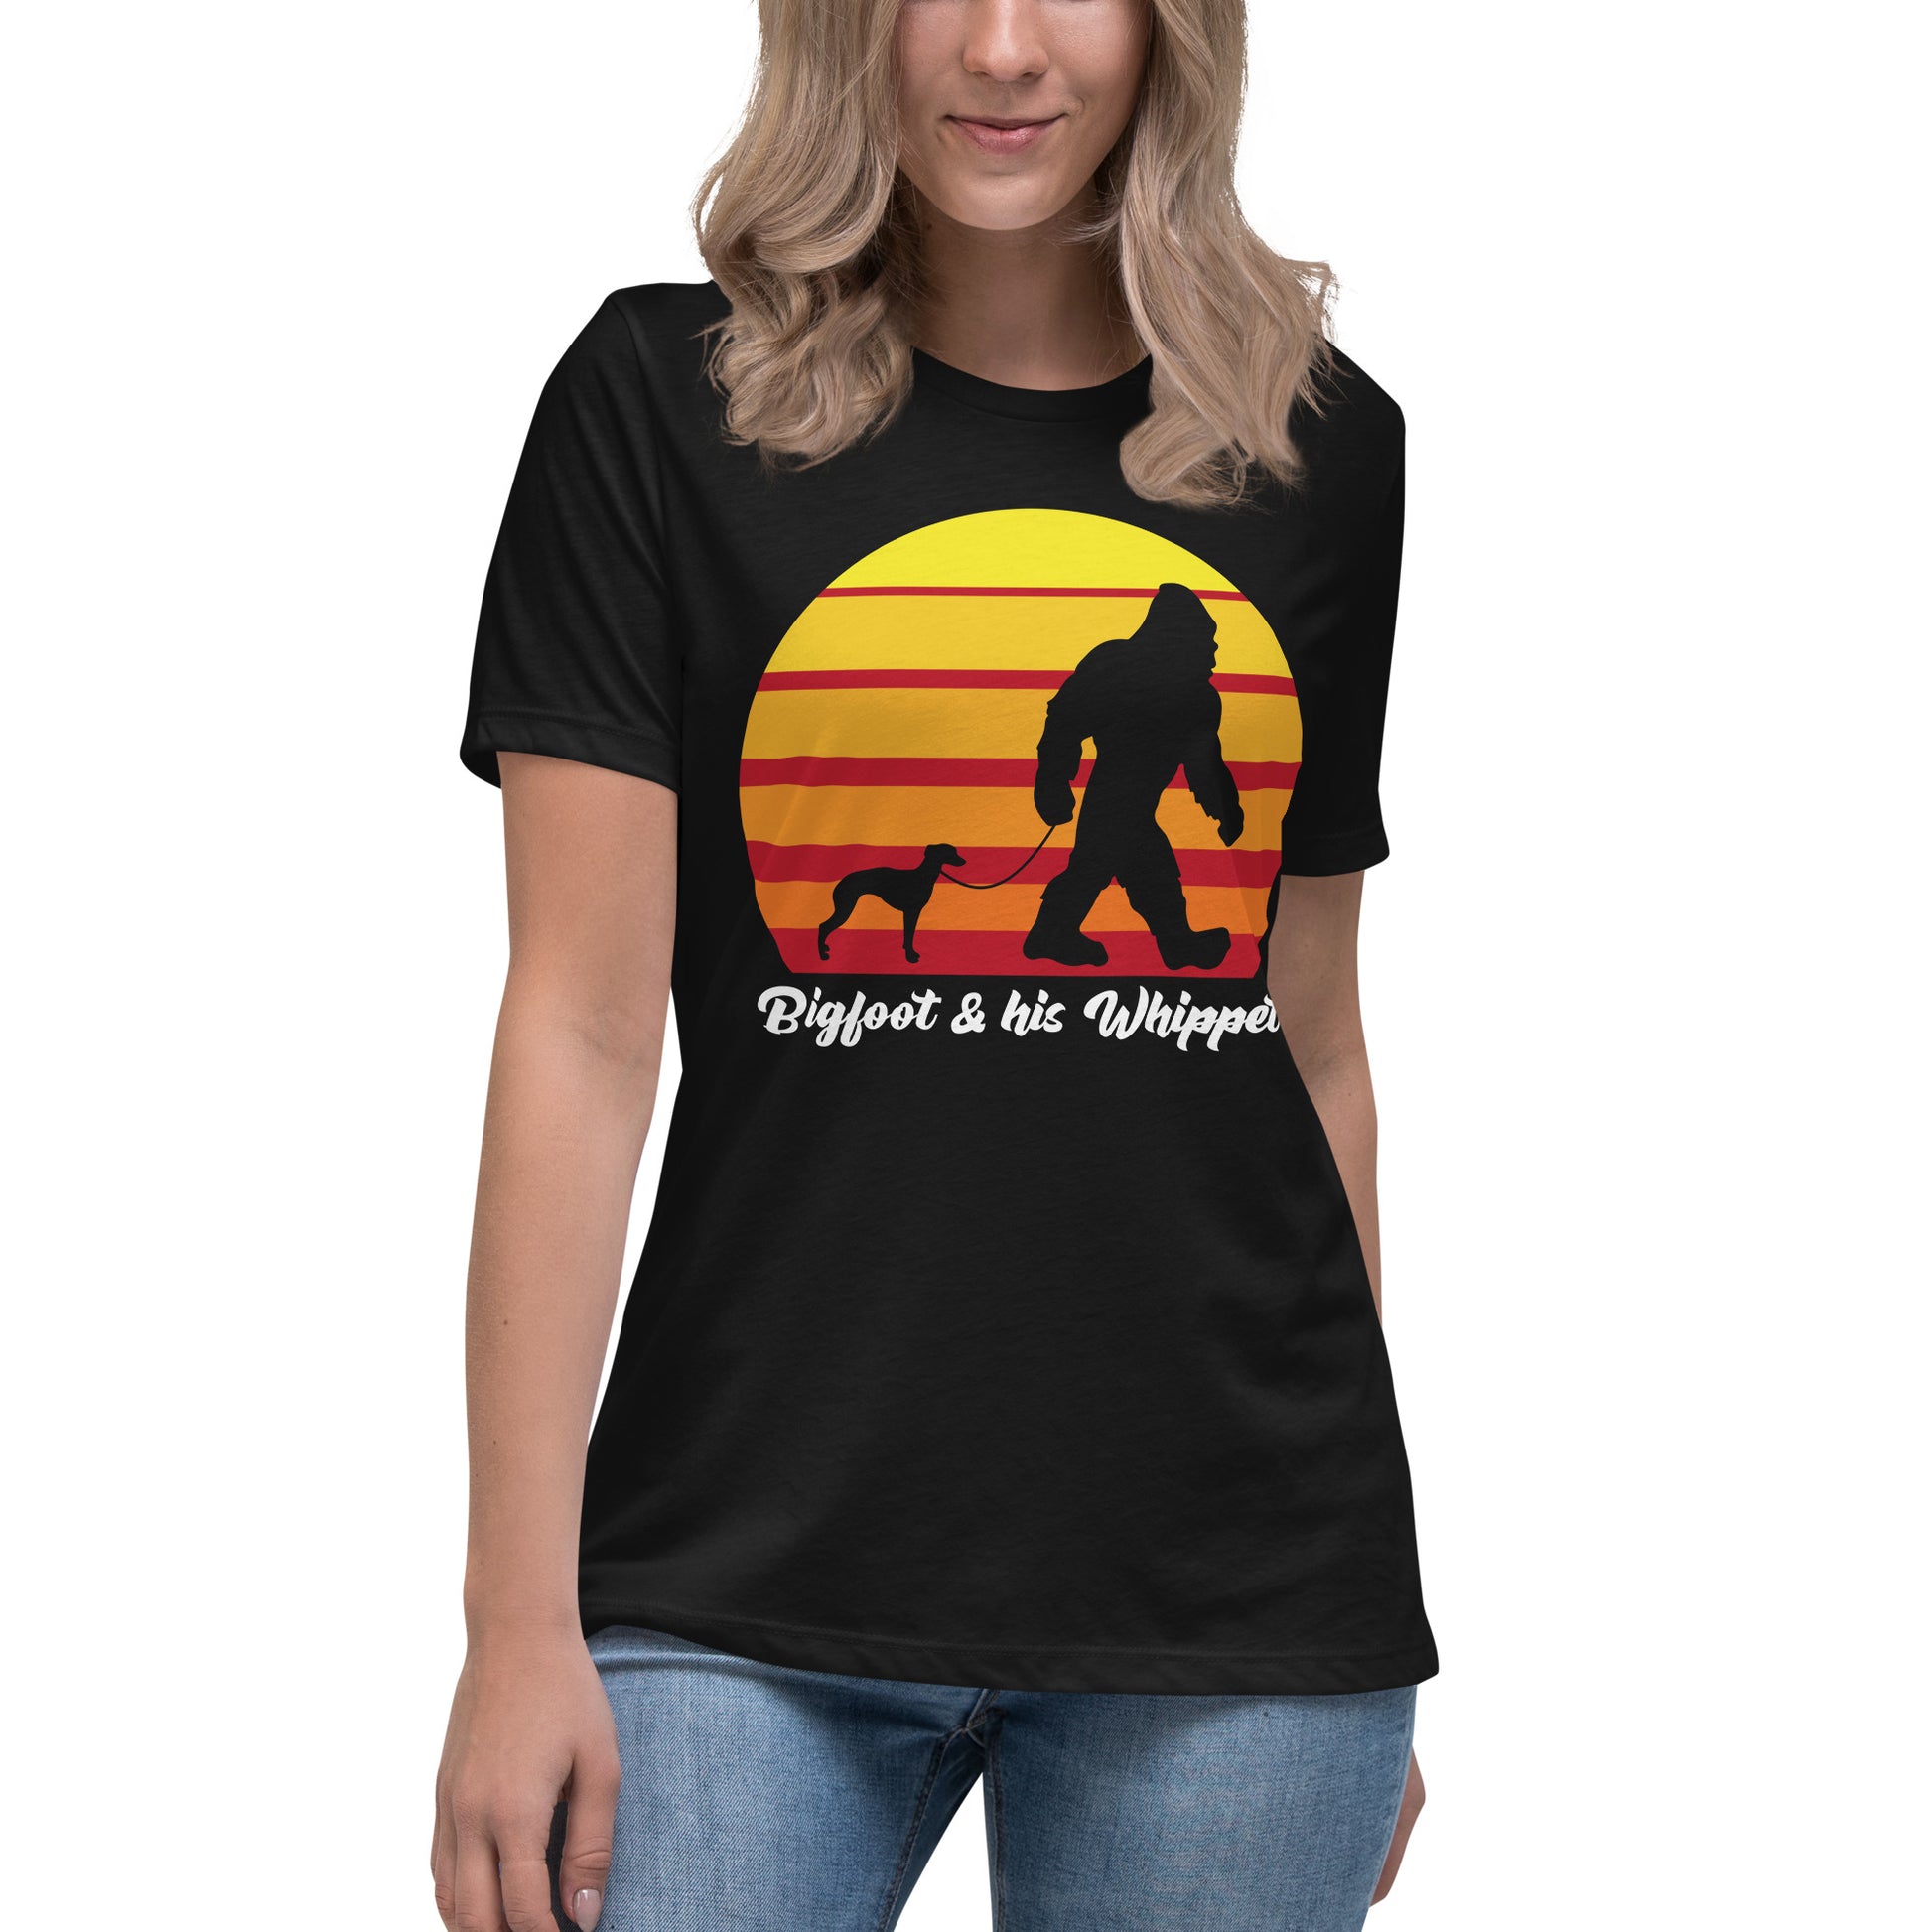 Bigfoot and his Staffordshire Whippet women’s black t-shirt by Dog Artistry.